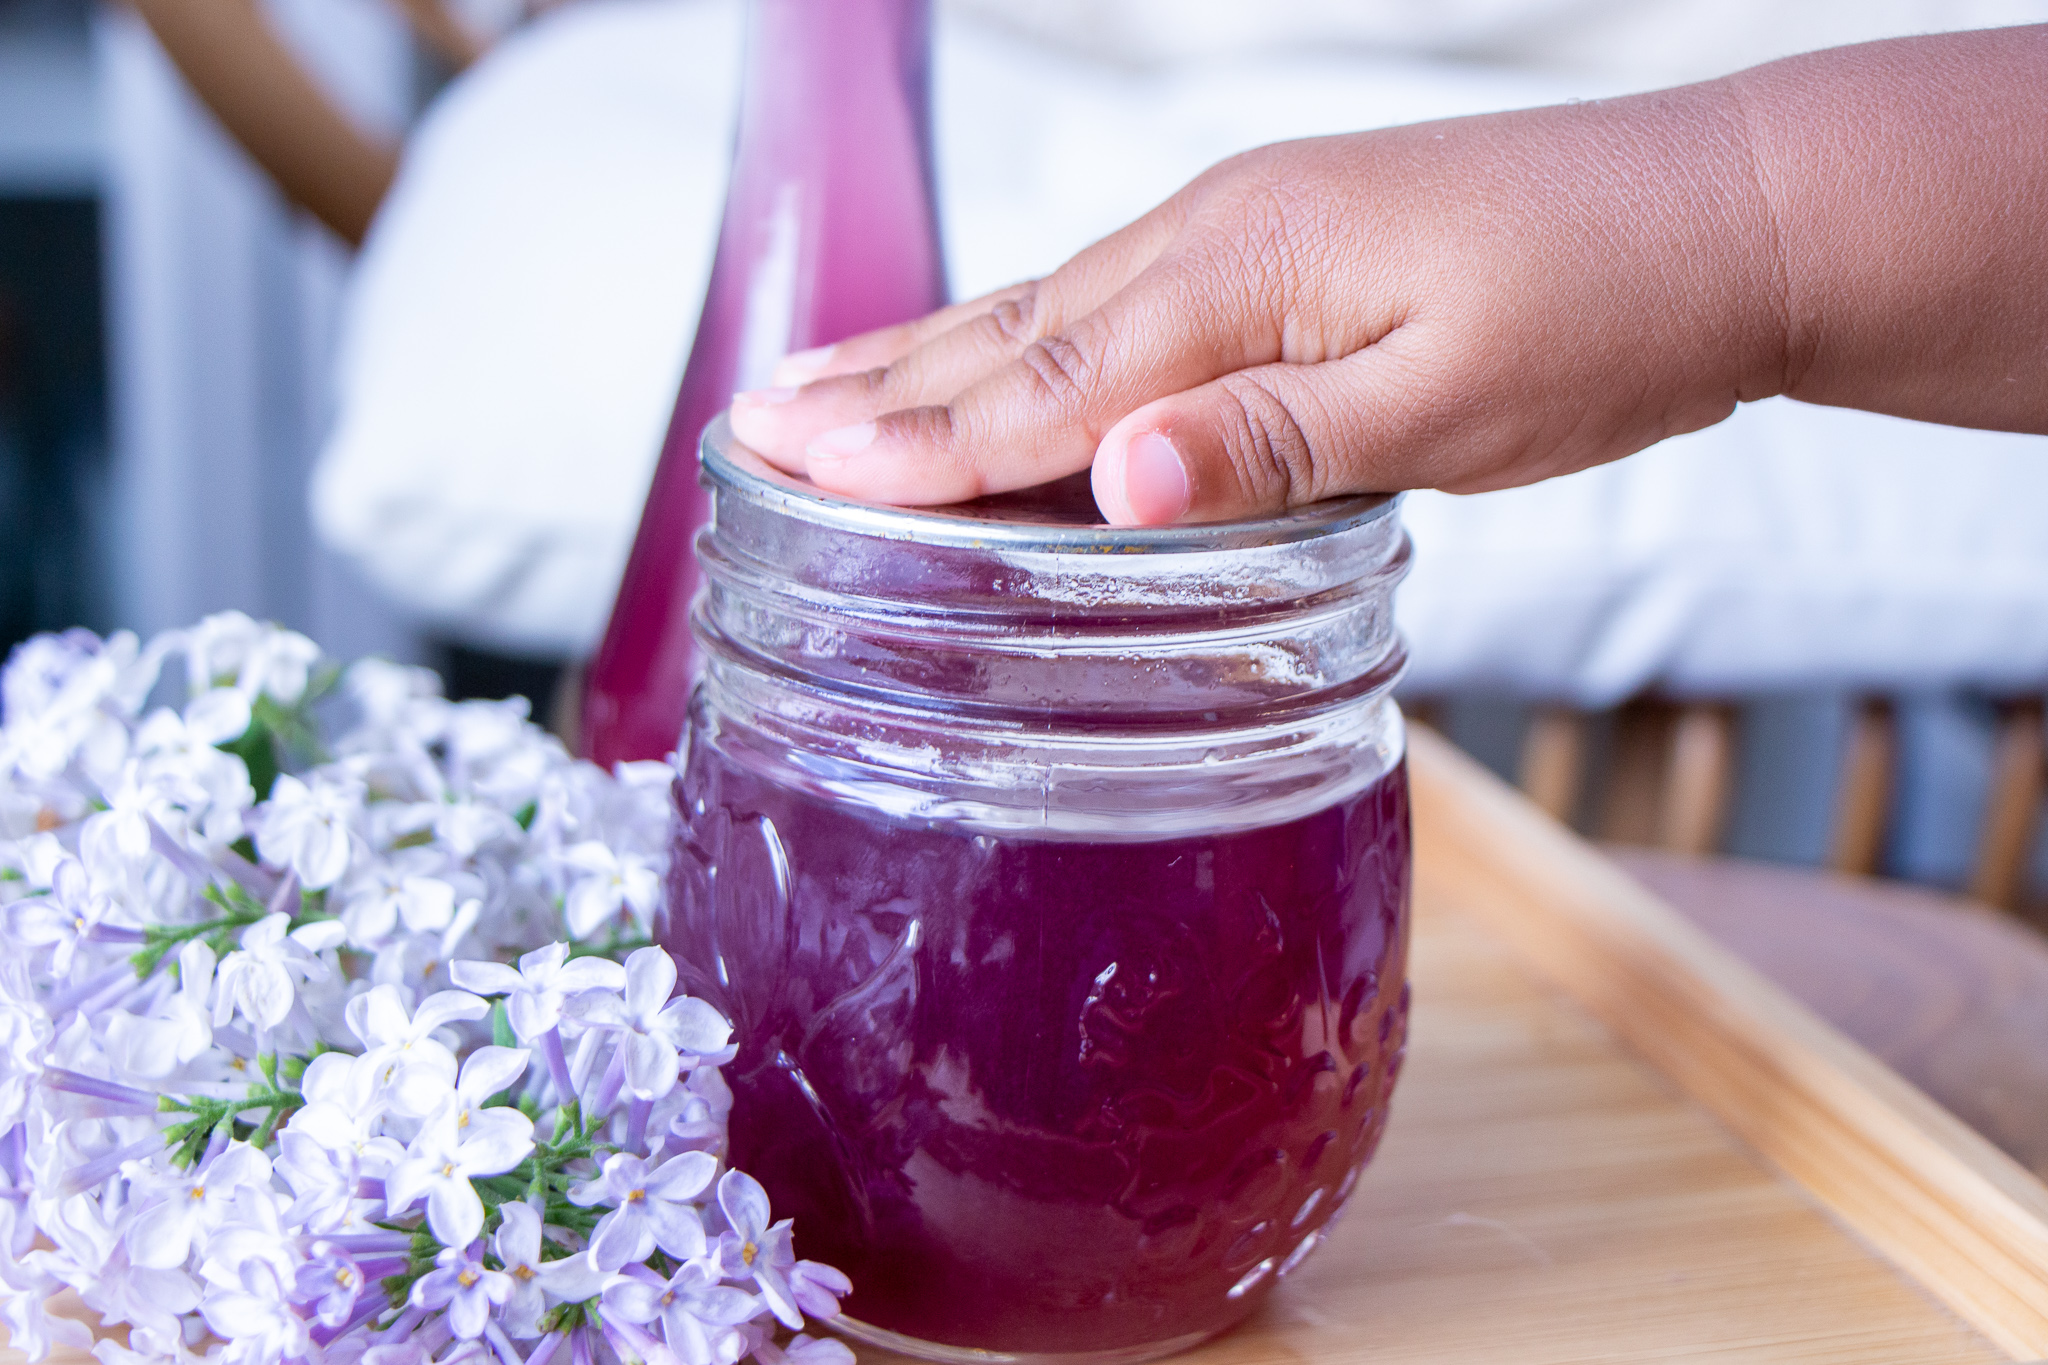 How to Make Lilac Simple Syrup